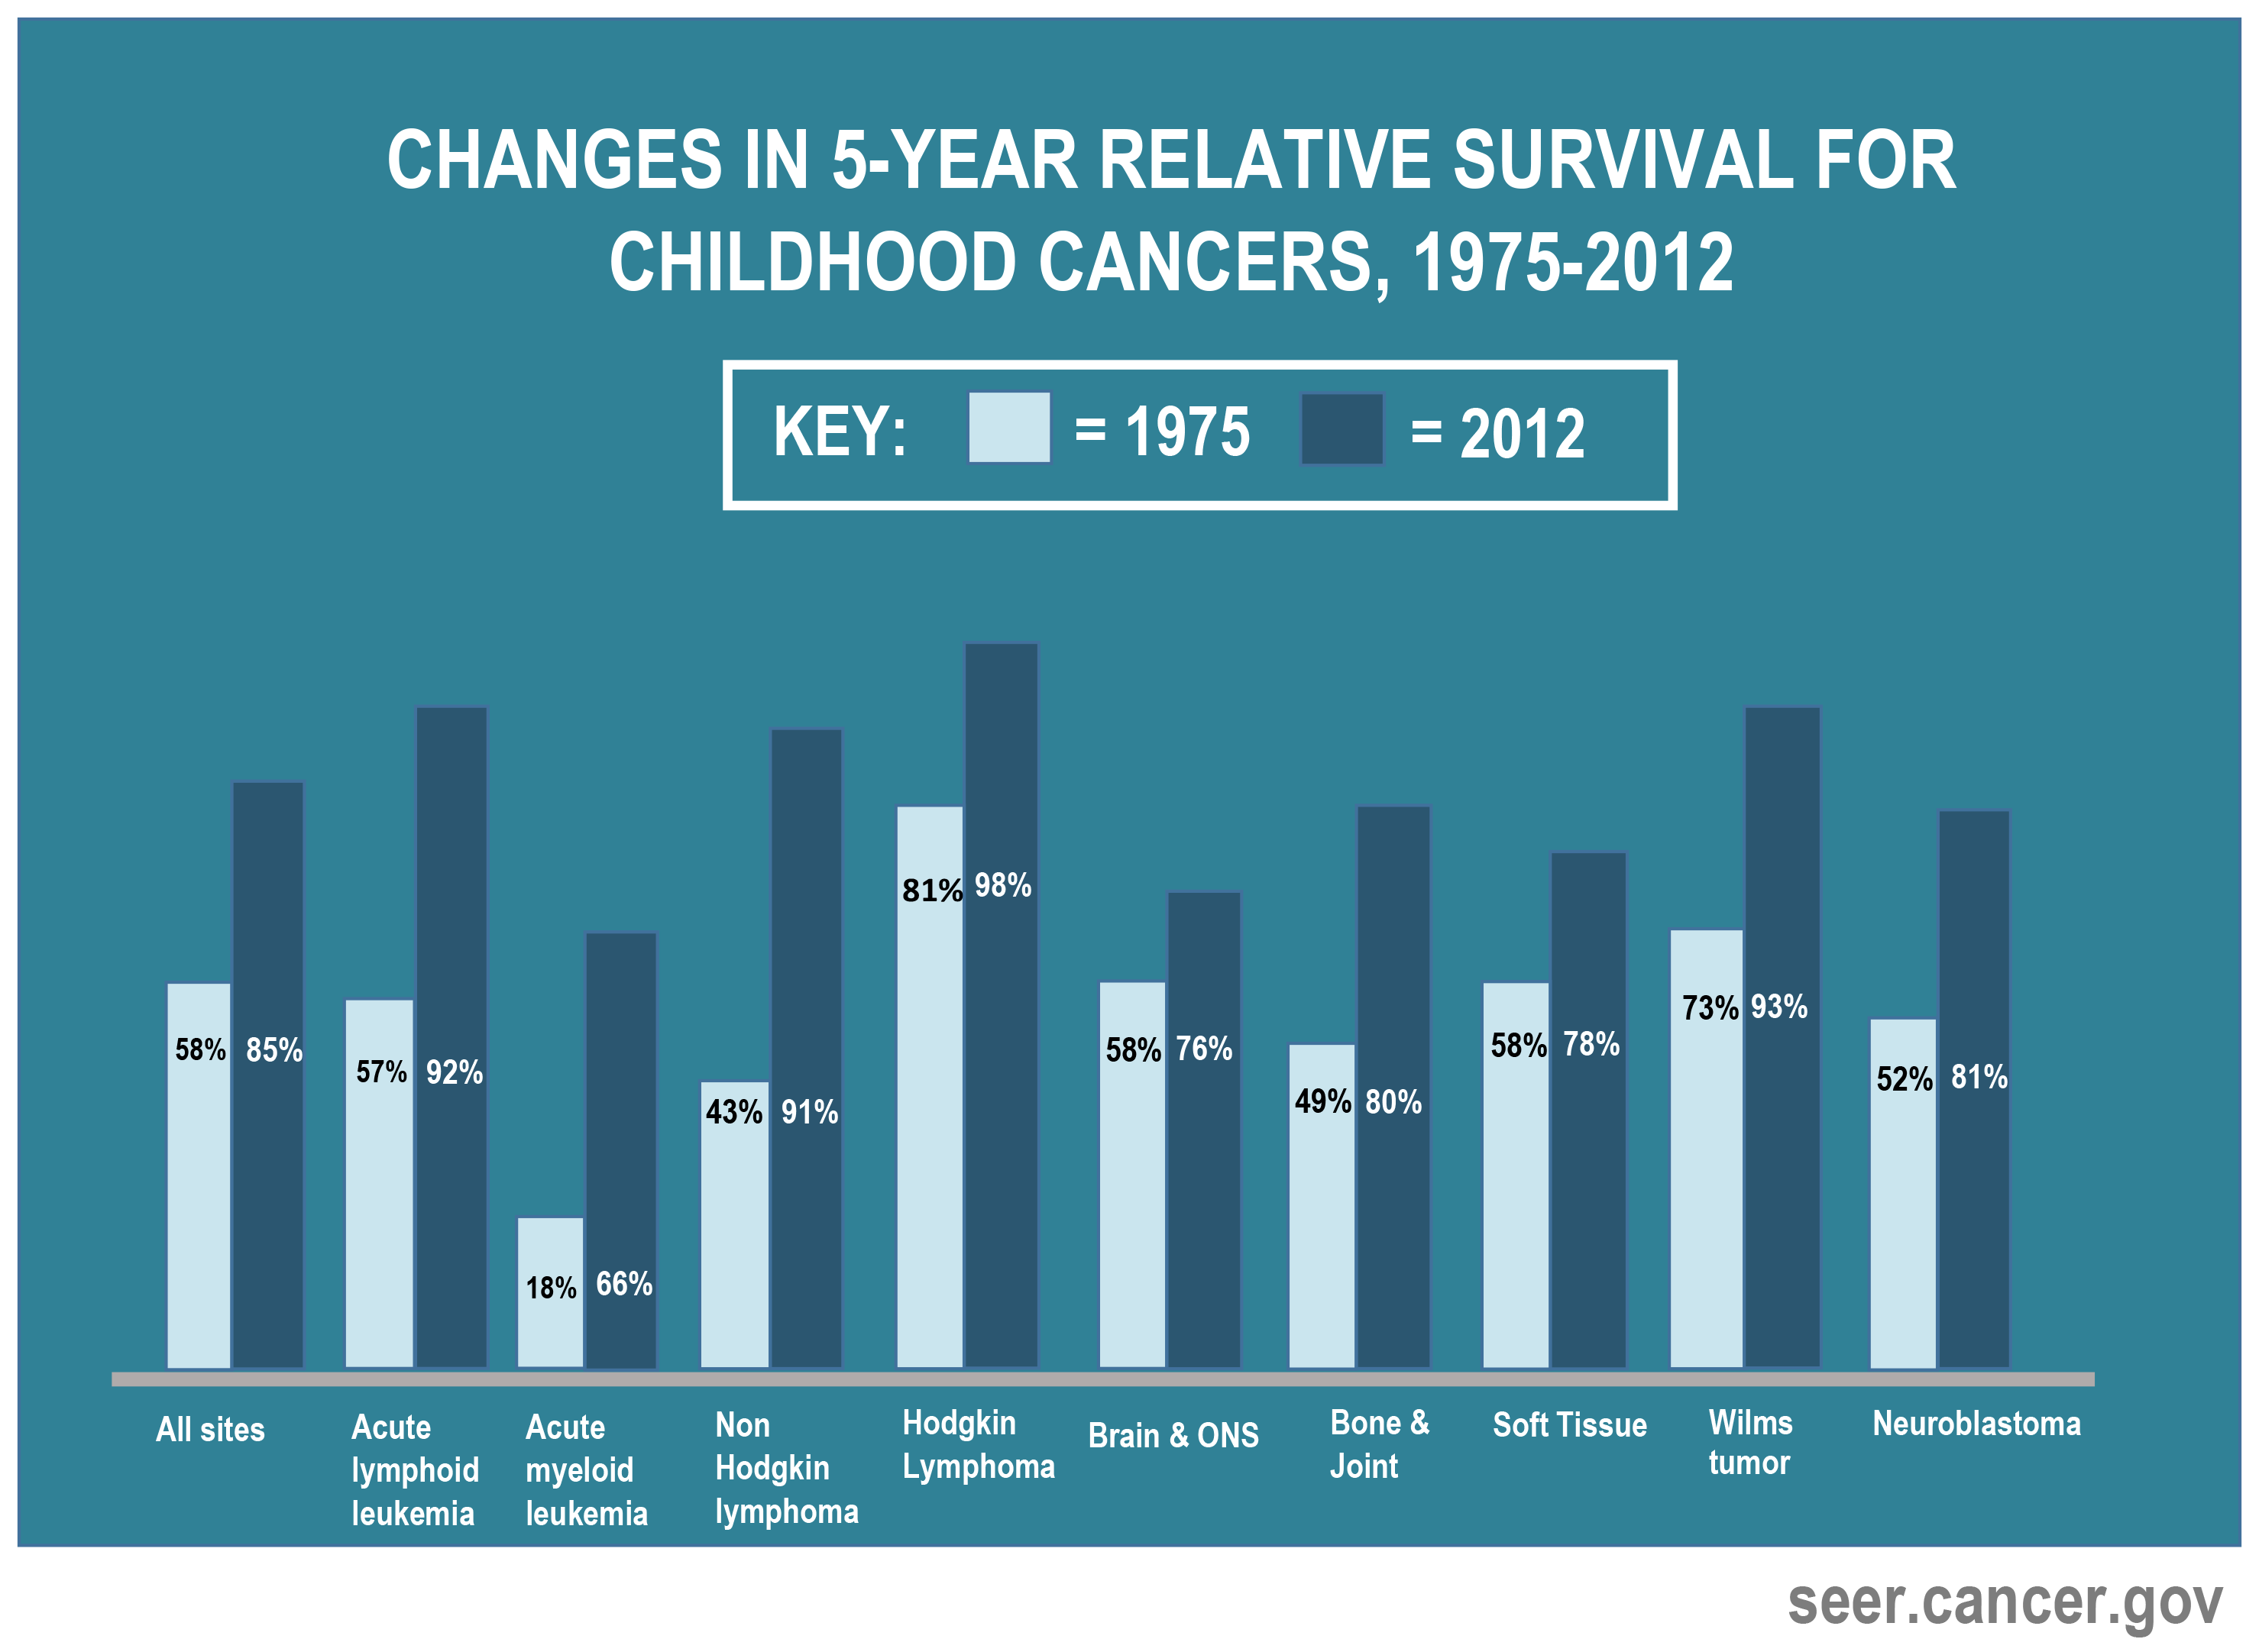 Change in 5-year survival by cancer site for childhood cancers 1975 to 2012